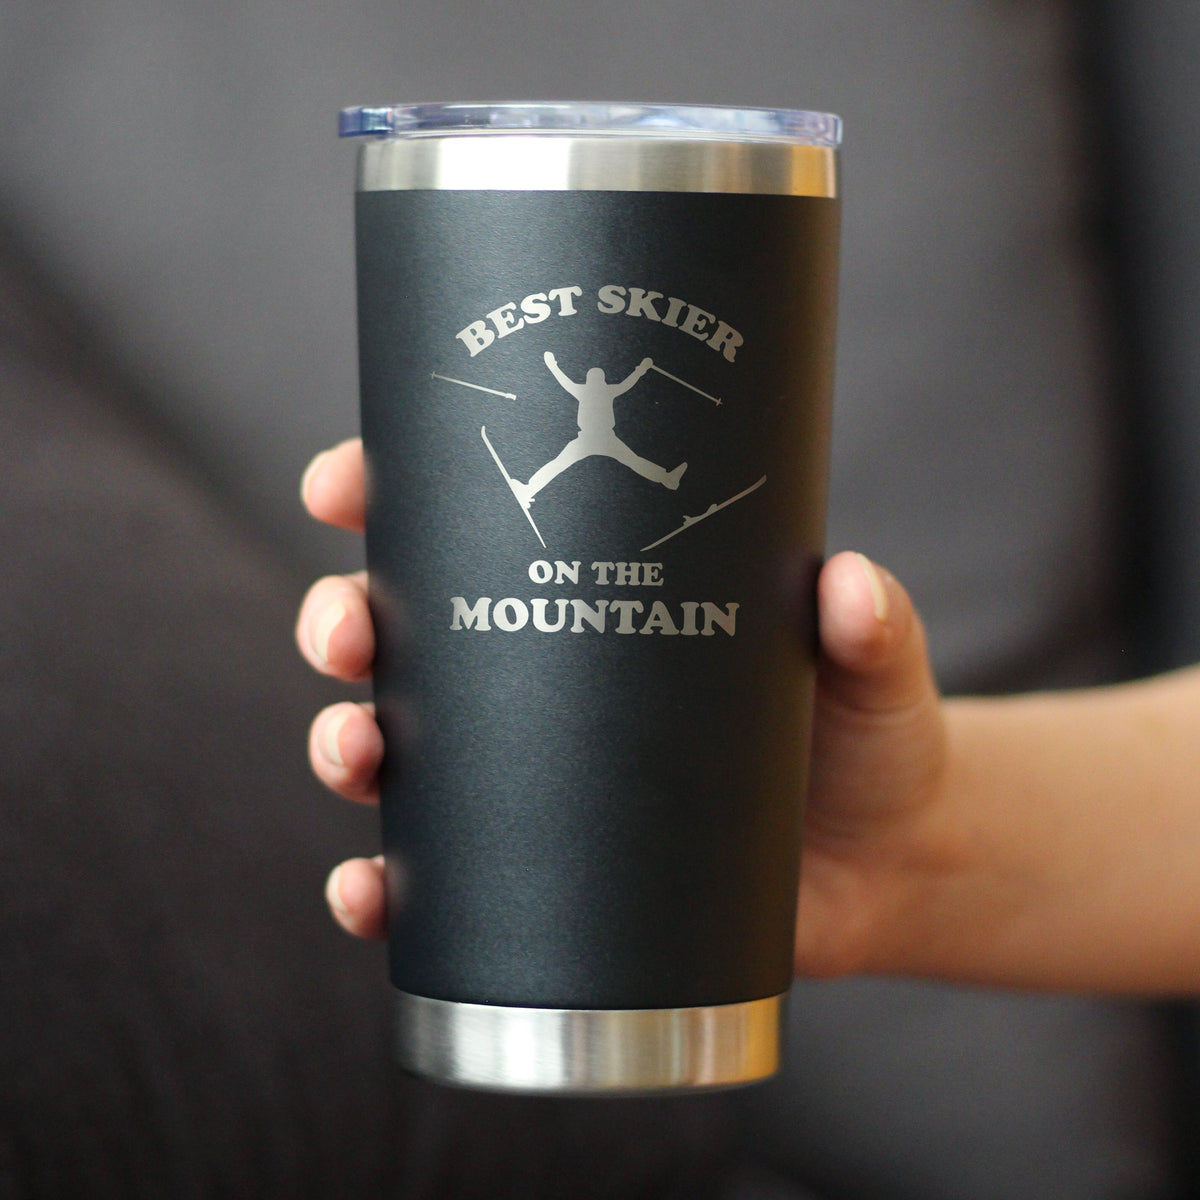 Best Skier On The Mountain - Insulated Coffee Tumbler Cup with Sliding Lid - Stainless Steel Travel Mug - Fun Skiing Gifts and Decor for Skiers